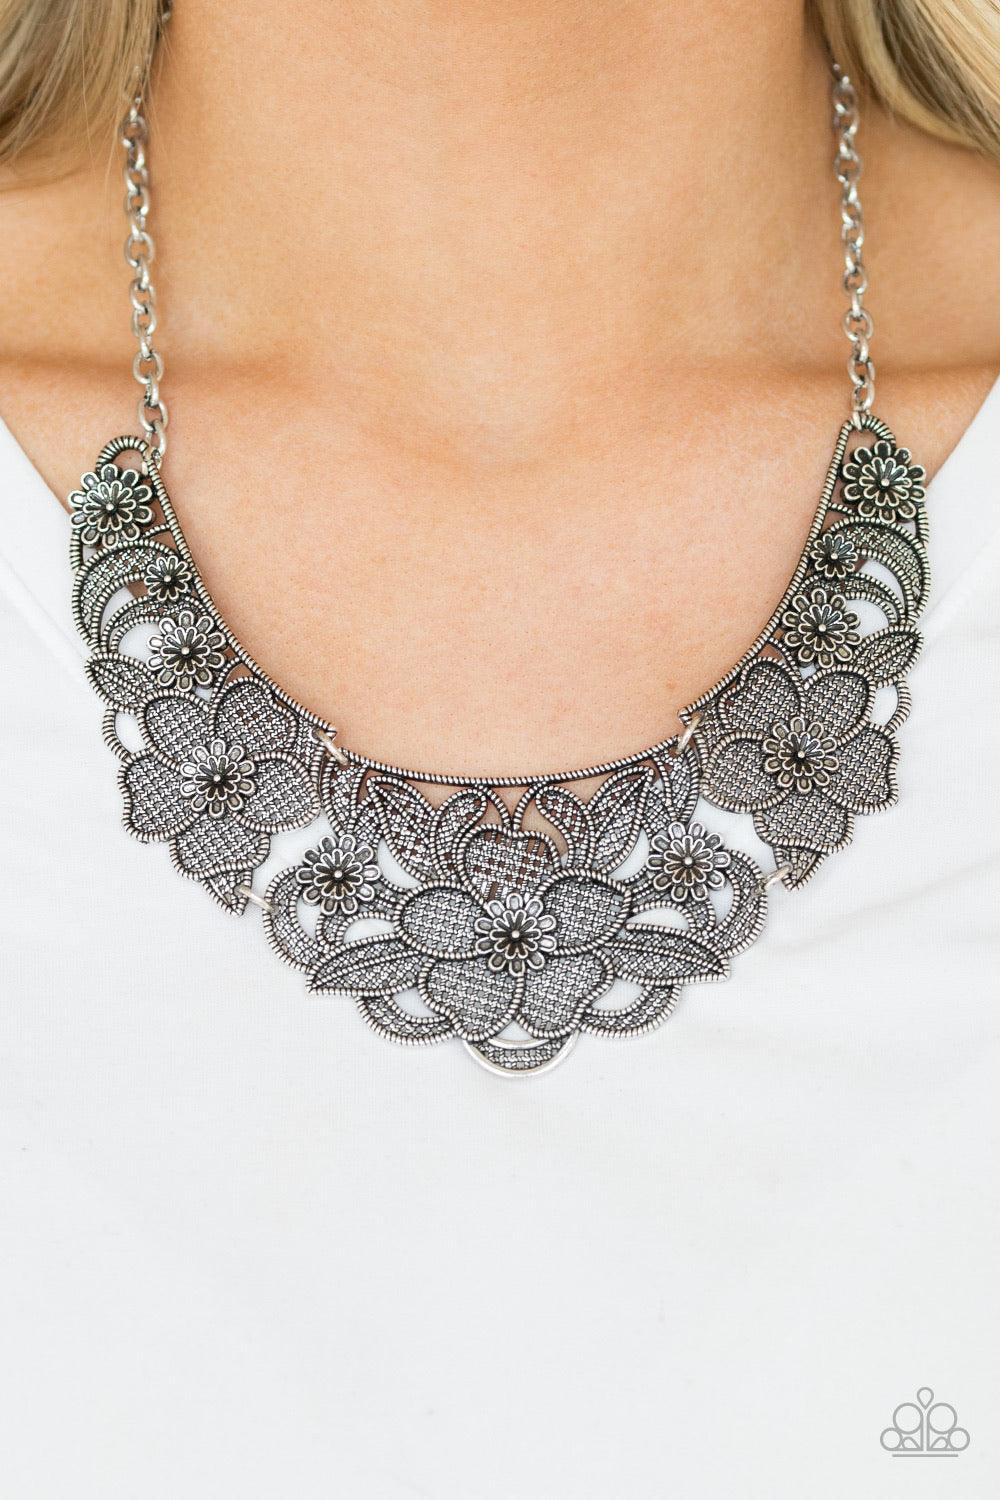 Paparazzi Accessories Petunia Paradise - Silver Featuring lattice-like patterns, shimmery silver flowers bloom below the collar for a seasonal look. Features an adjustable clasp closure. Sold as one individual necklace. Includes one pair of matching earri